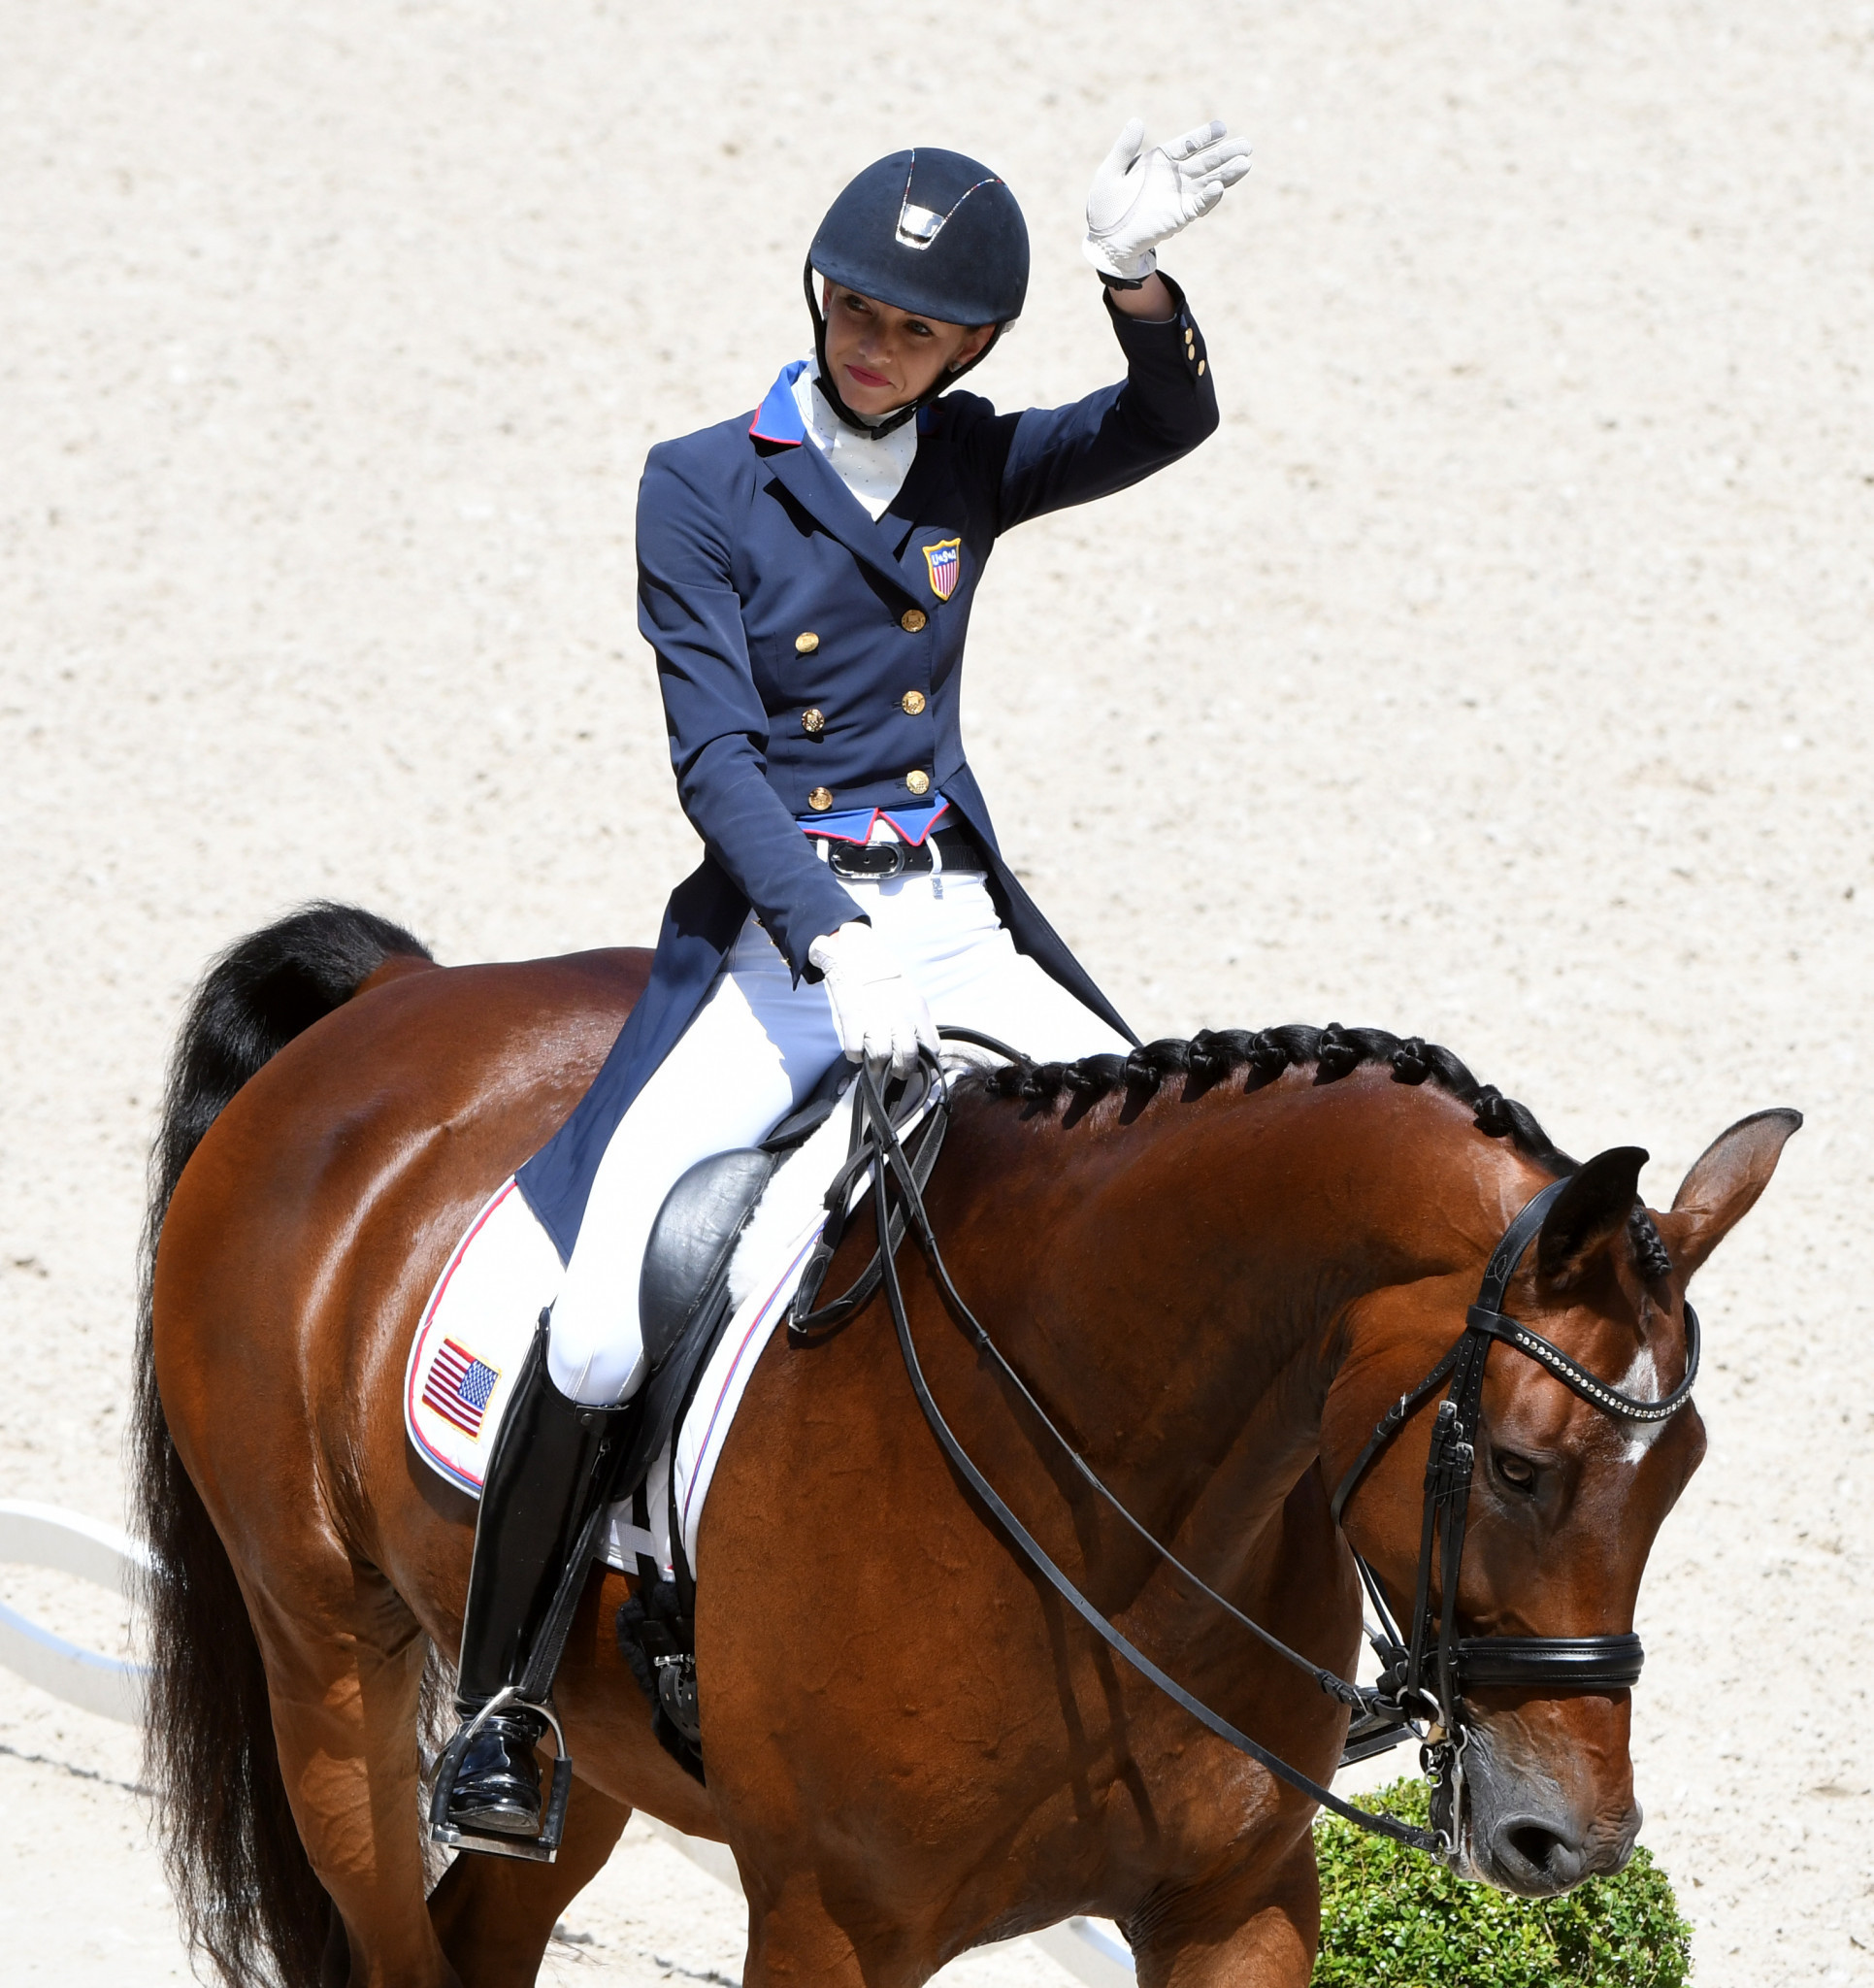 Laura Graves produced a personal best in the Dressage World Cup at Paris but still had to settle for another silver ©FEI